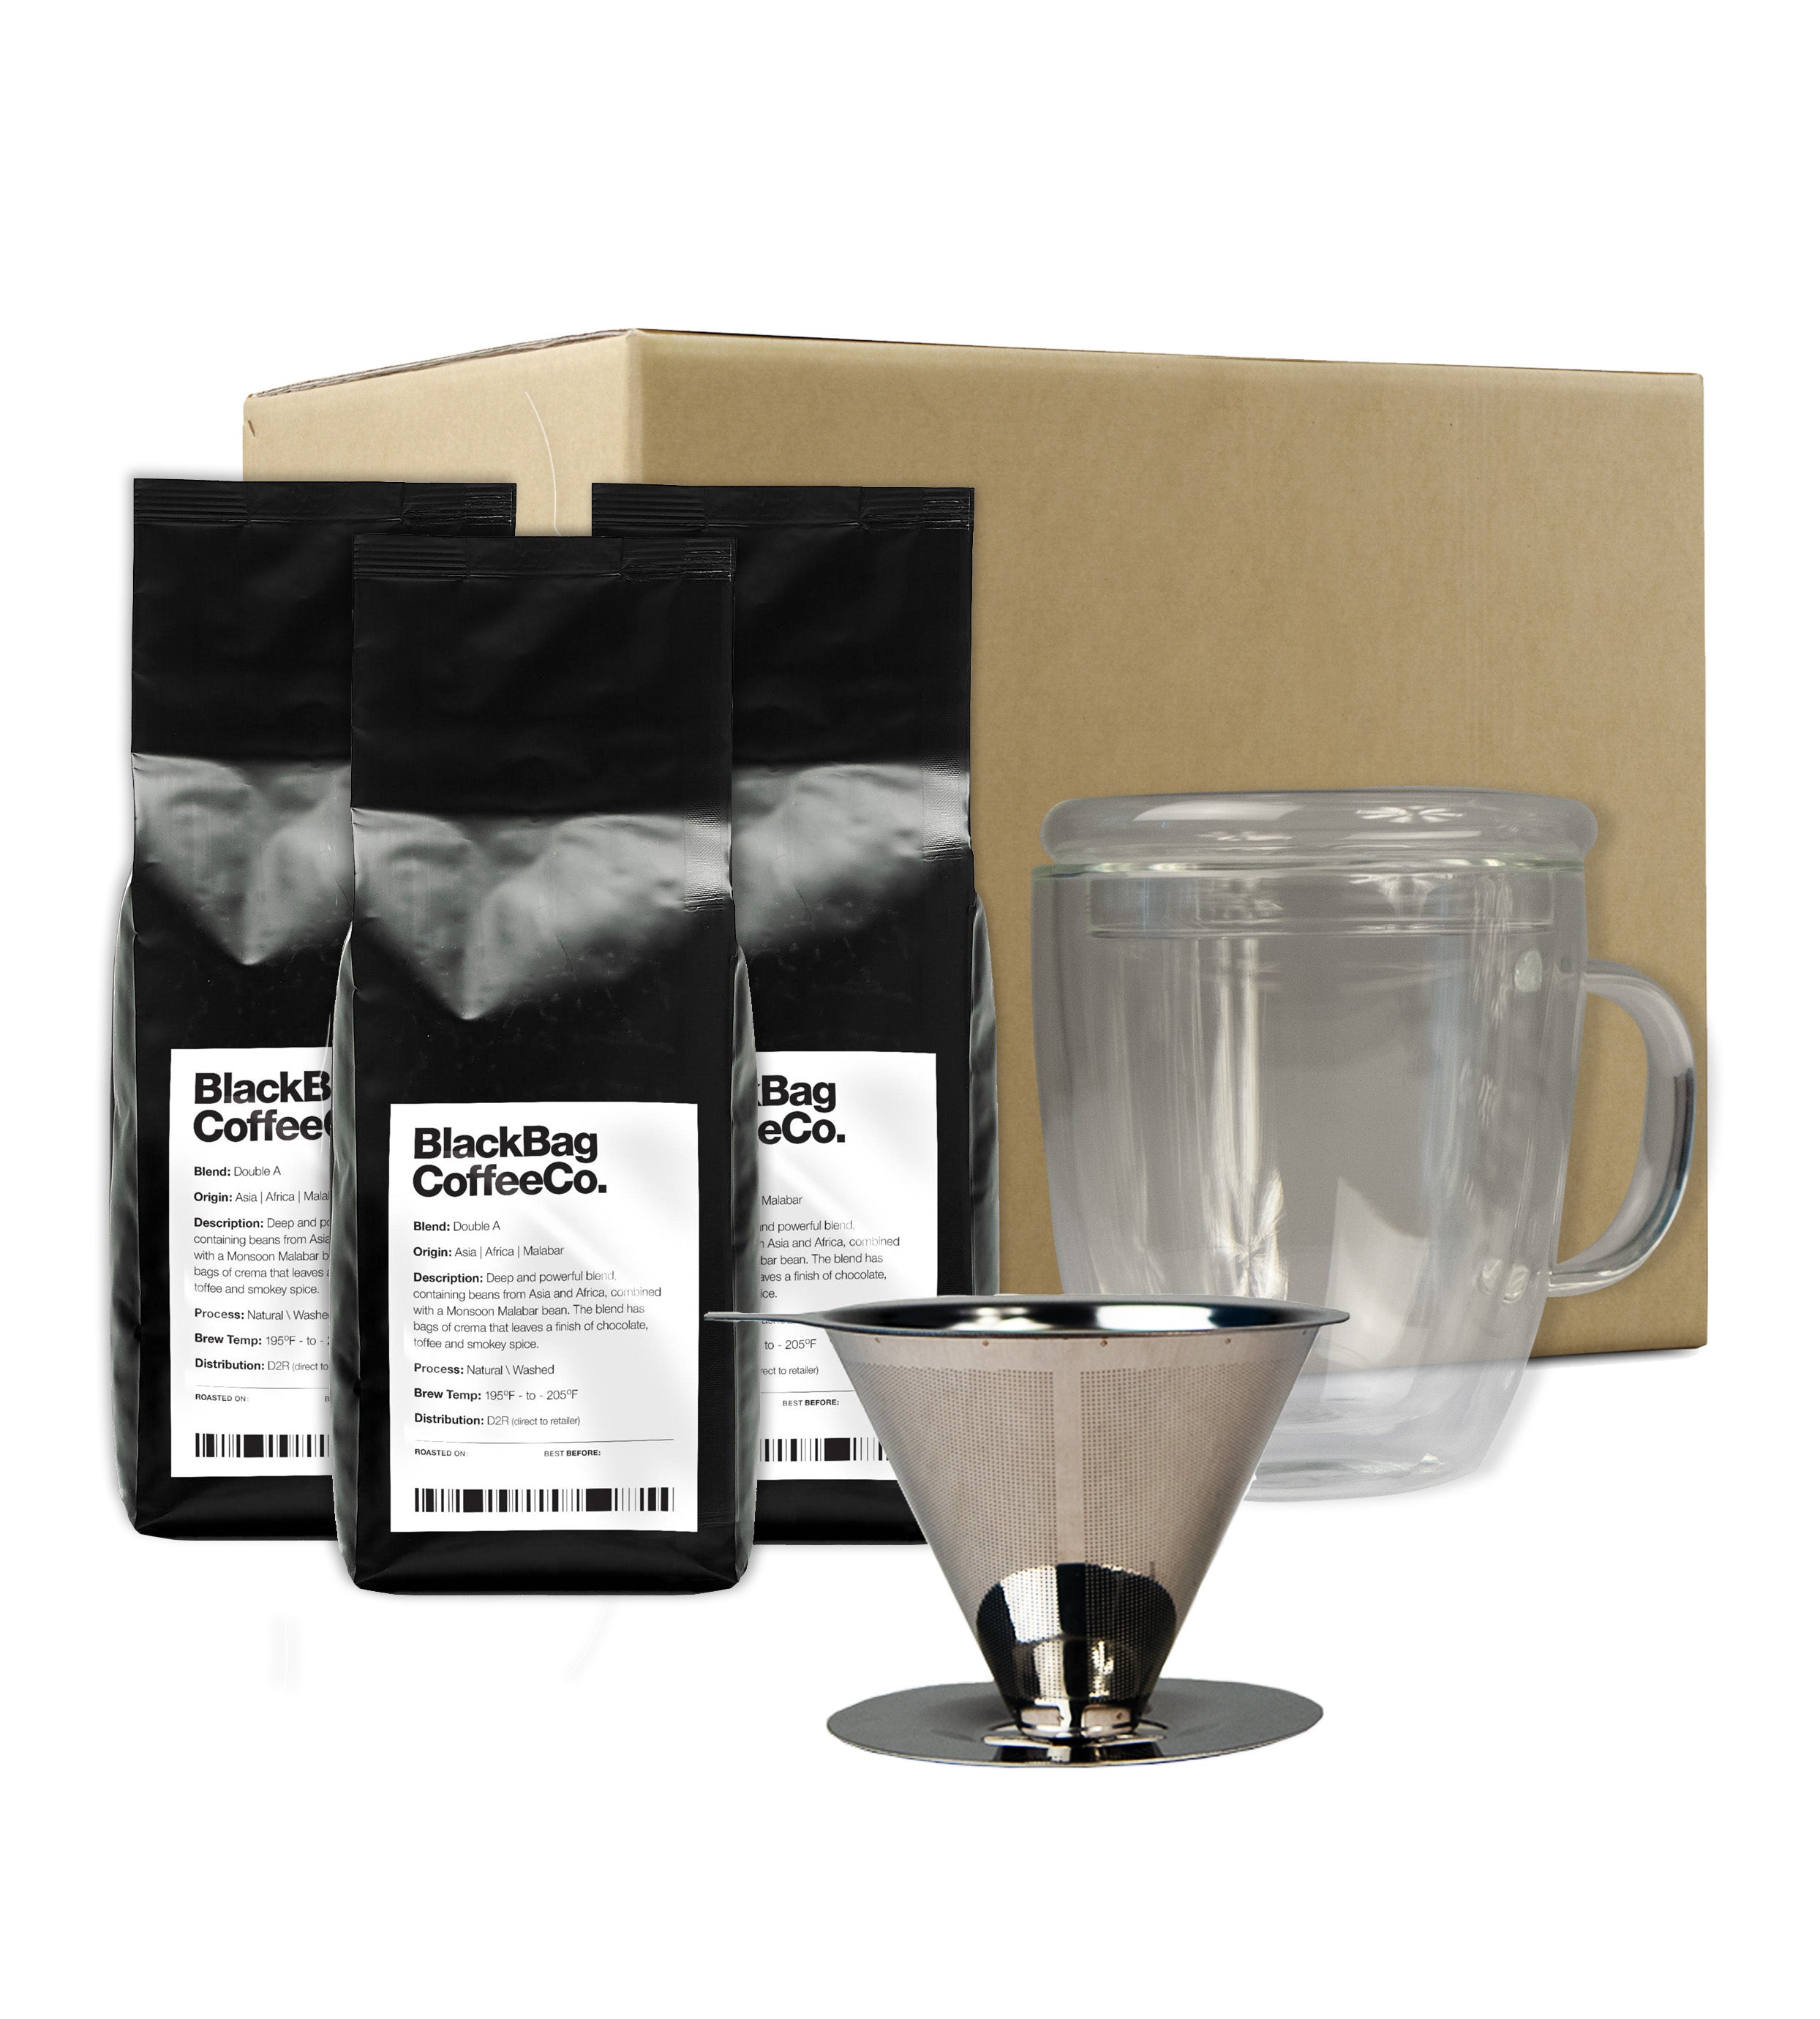 V60 Giftset (V60, Super Cup & 3x Blends of Coffee)